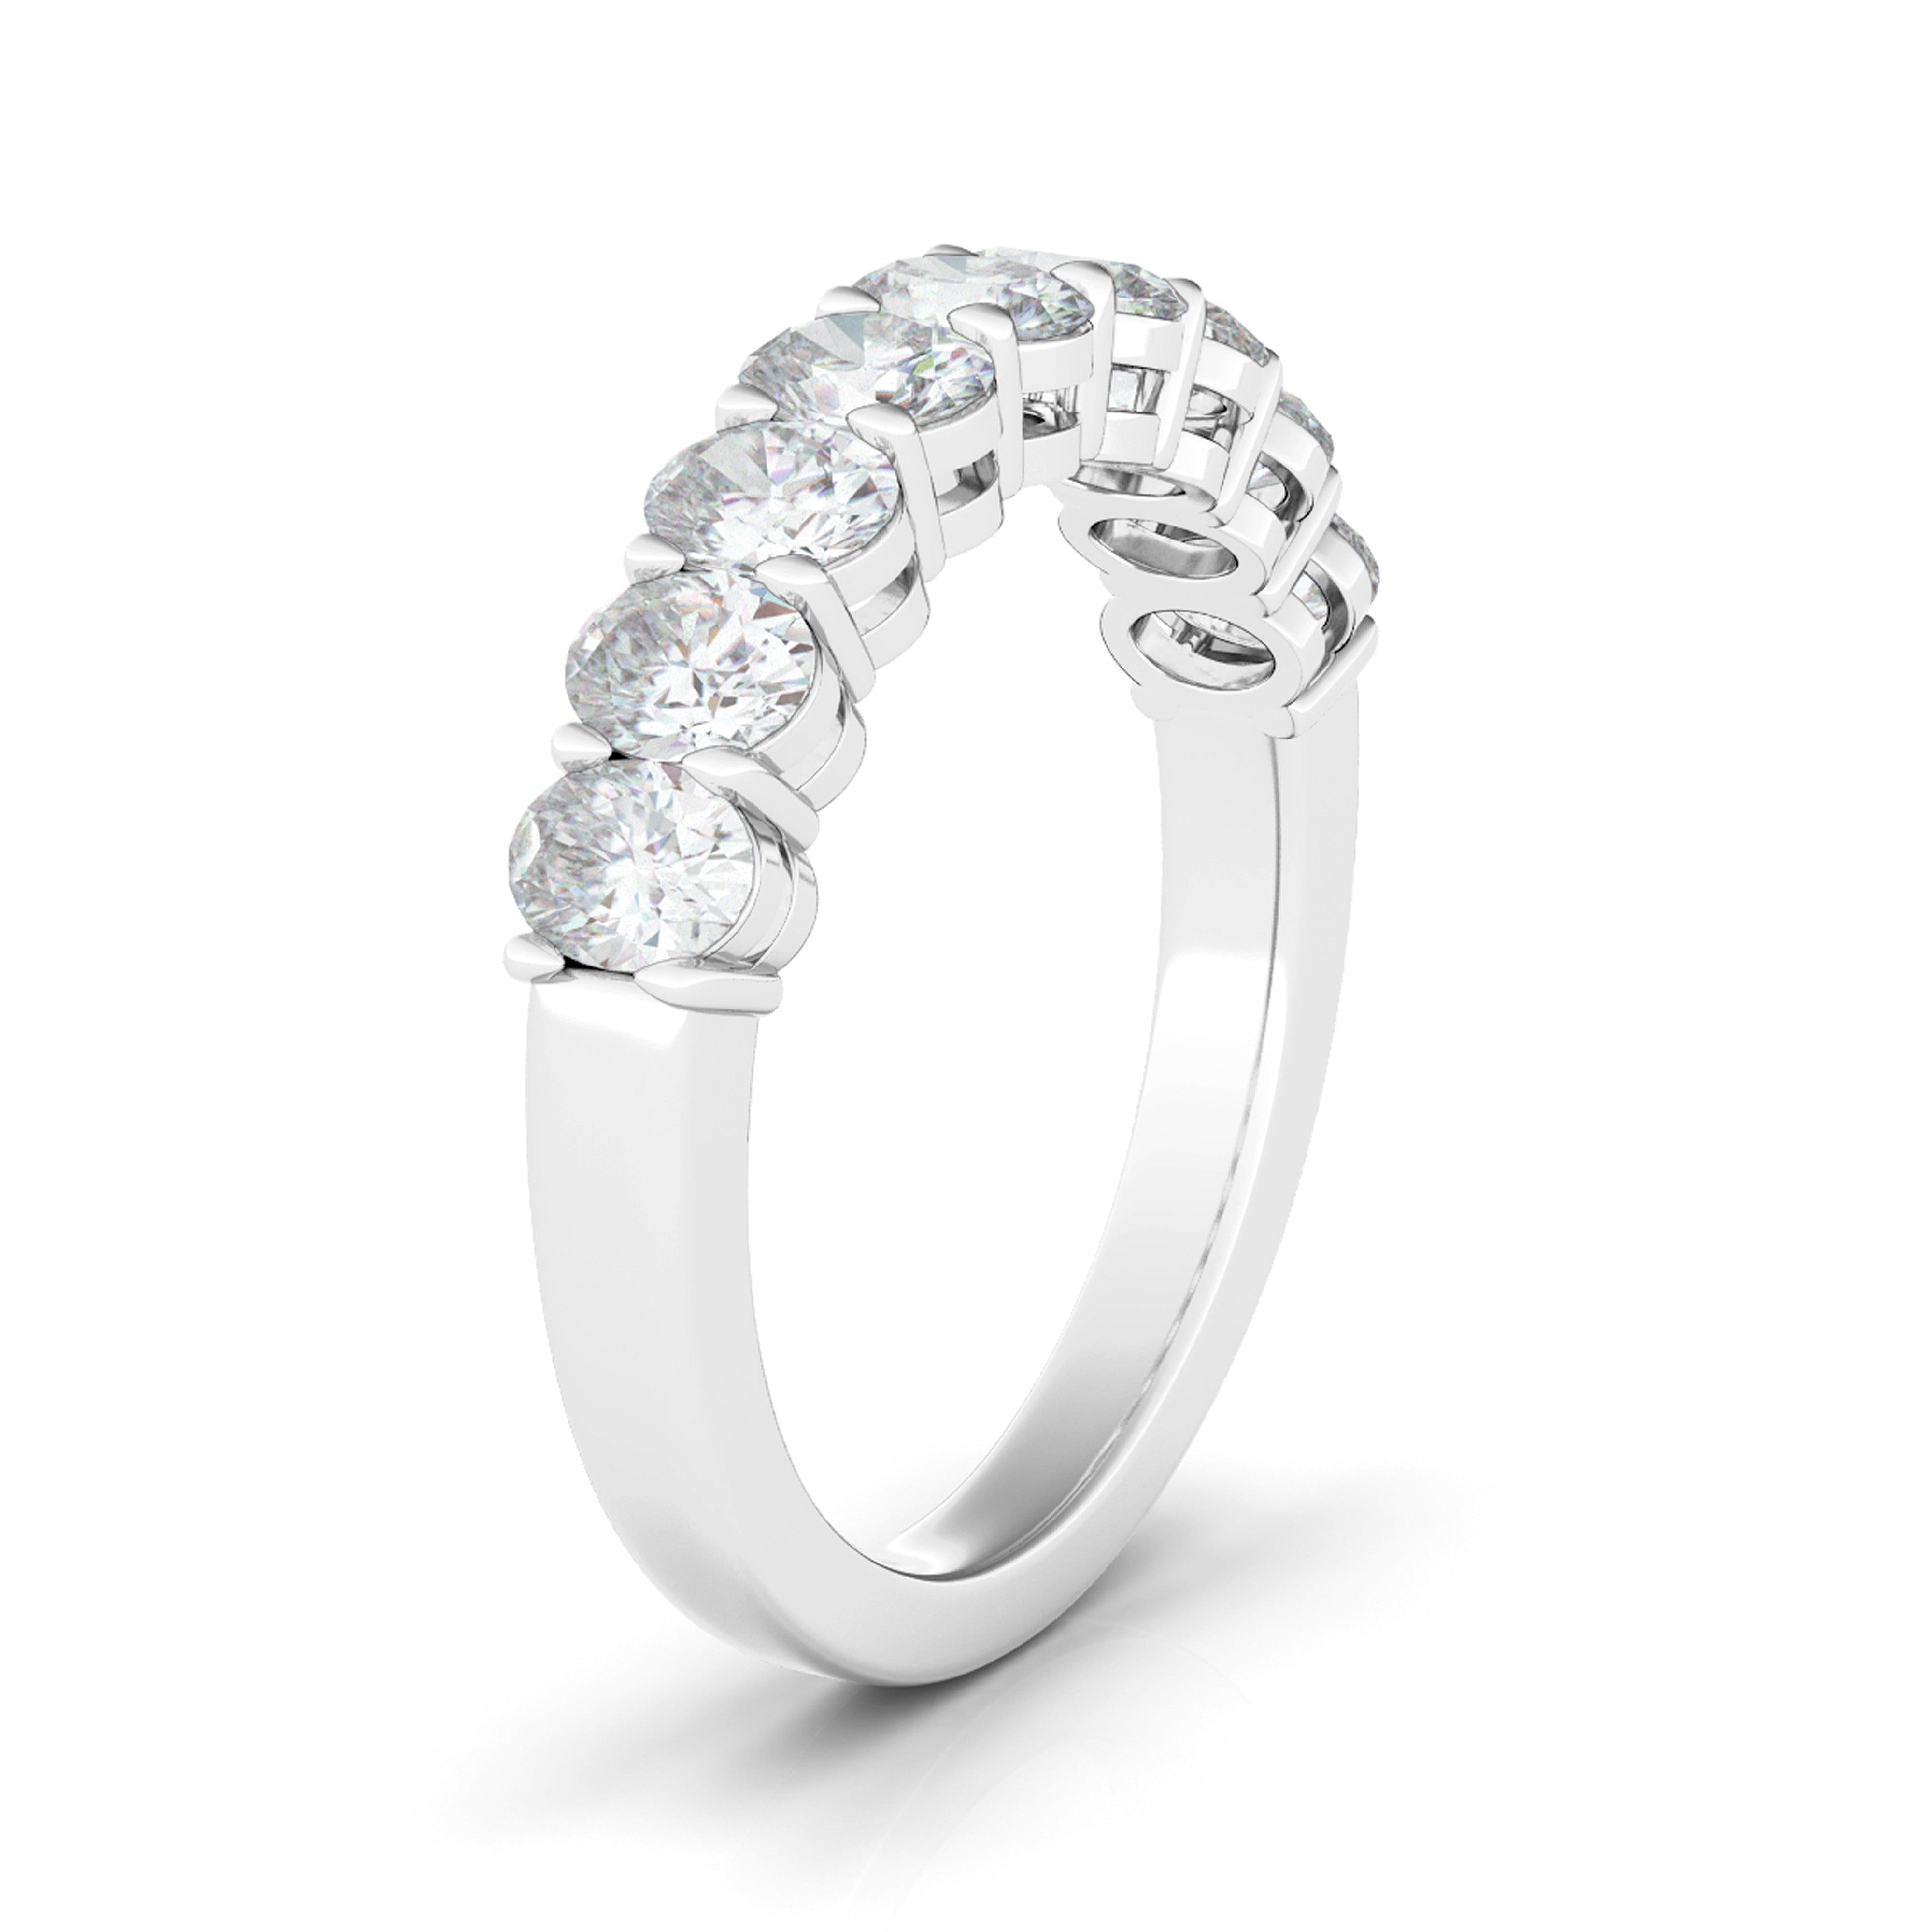 The Simplified Gold Diamond Eternity Ring